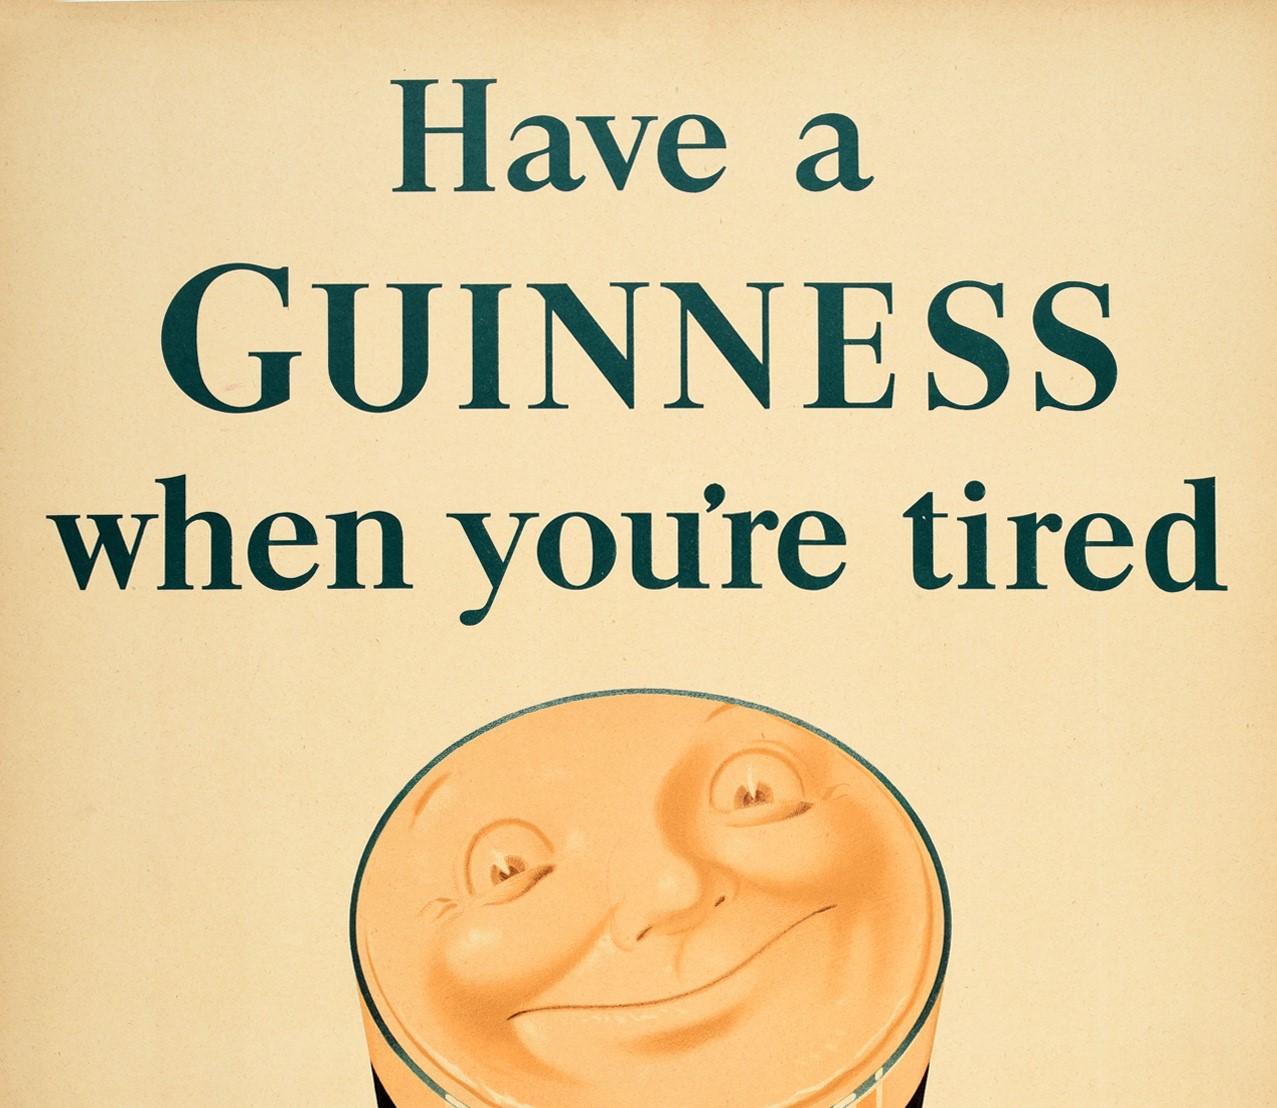 Original vintage advertising poster for the iconic drink Guinness Irish stout beer - Have a Guinness when you're tired - featuring a pint glass of Guinness relaxing on a comfortable red armchair with a face smiling out from the foam and the text